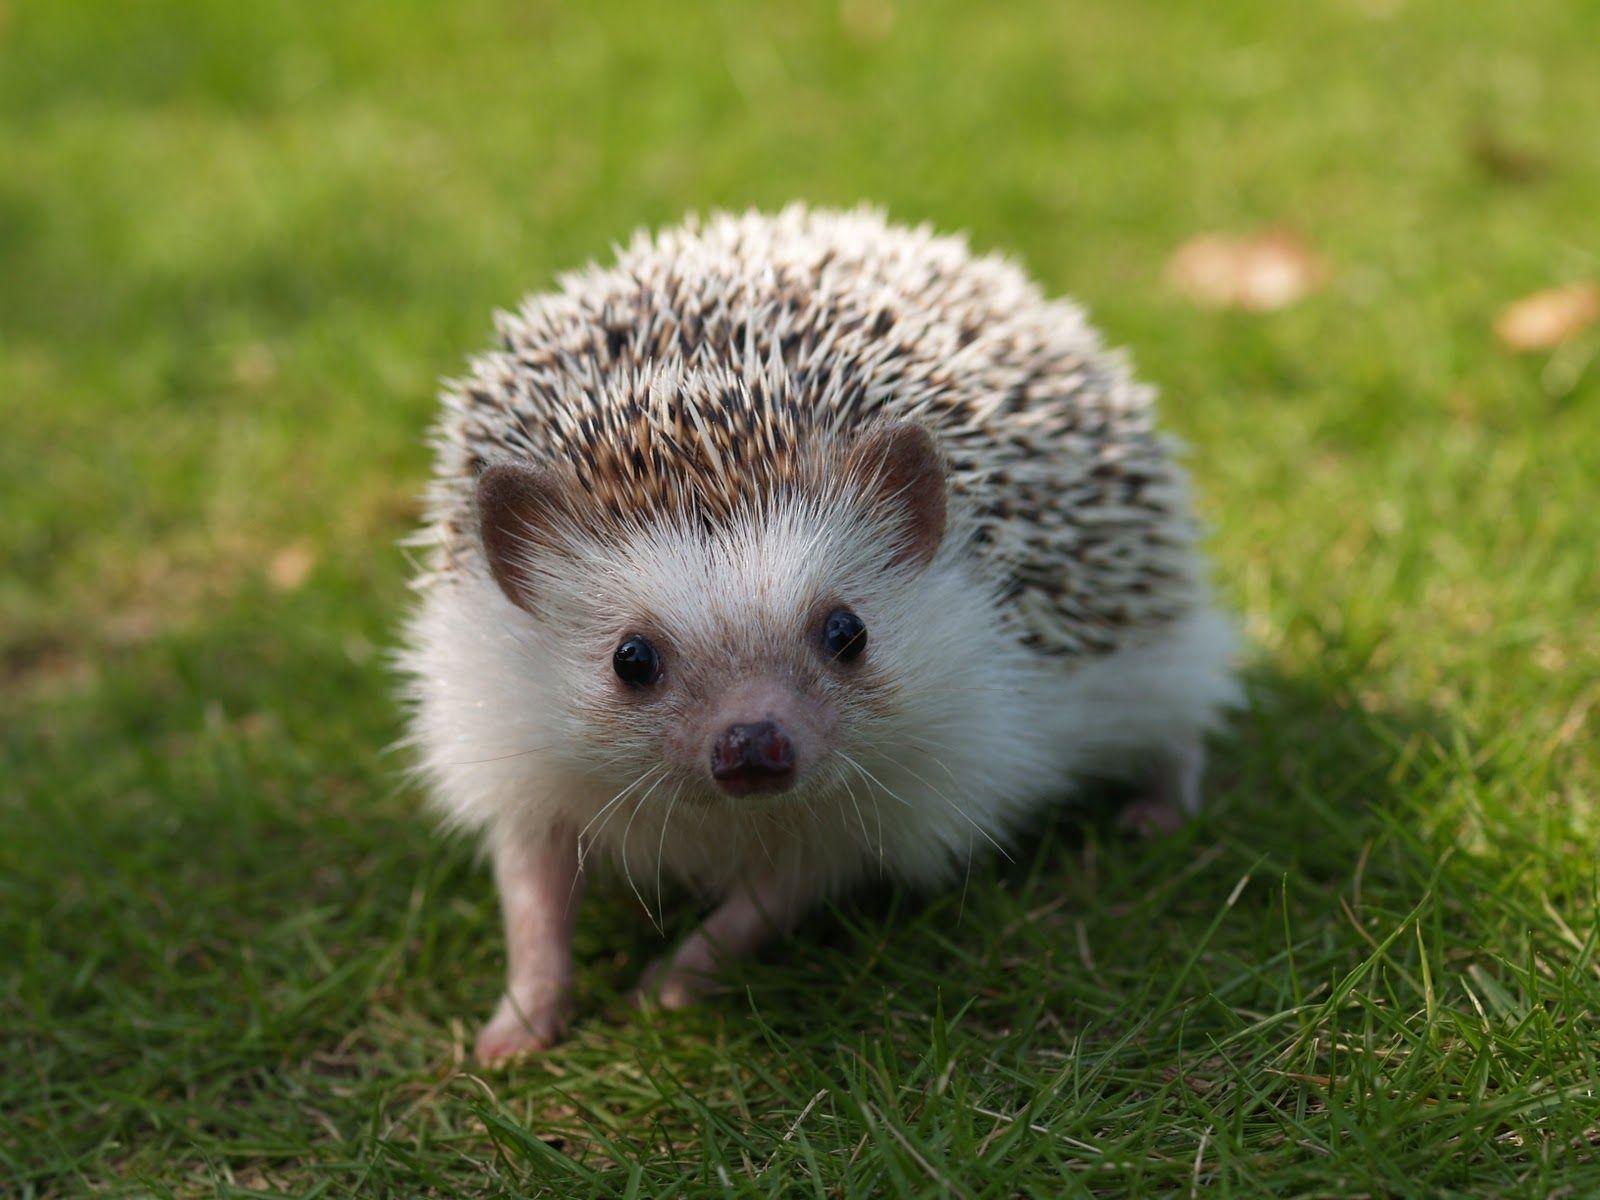 Hedgehog One of the Oldest Mammals on Earth